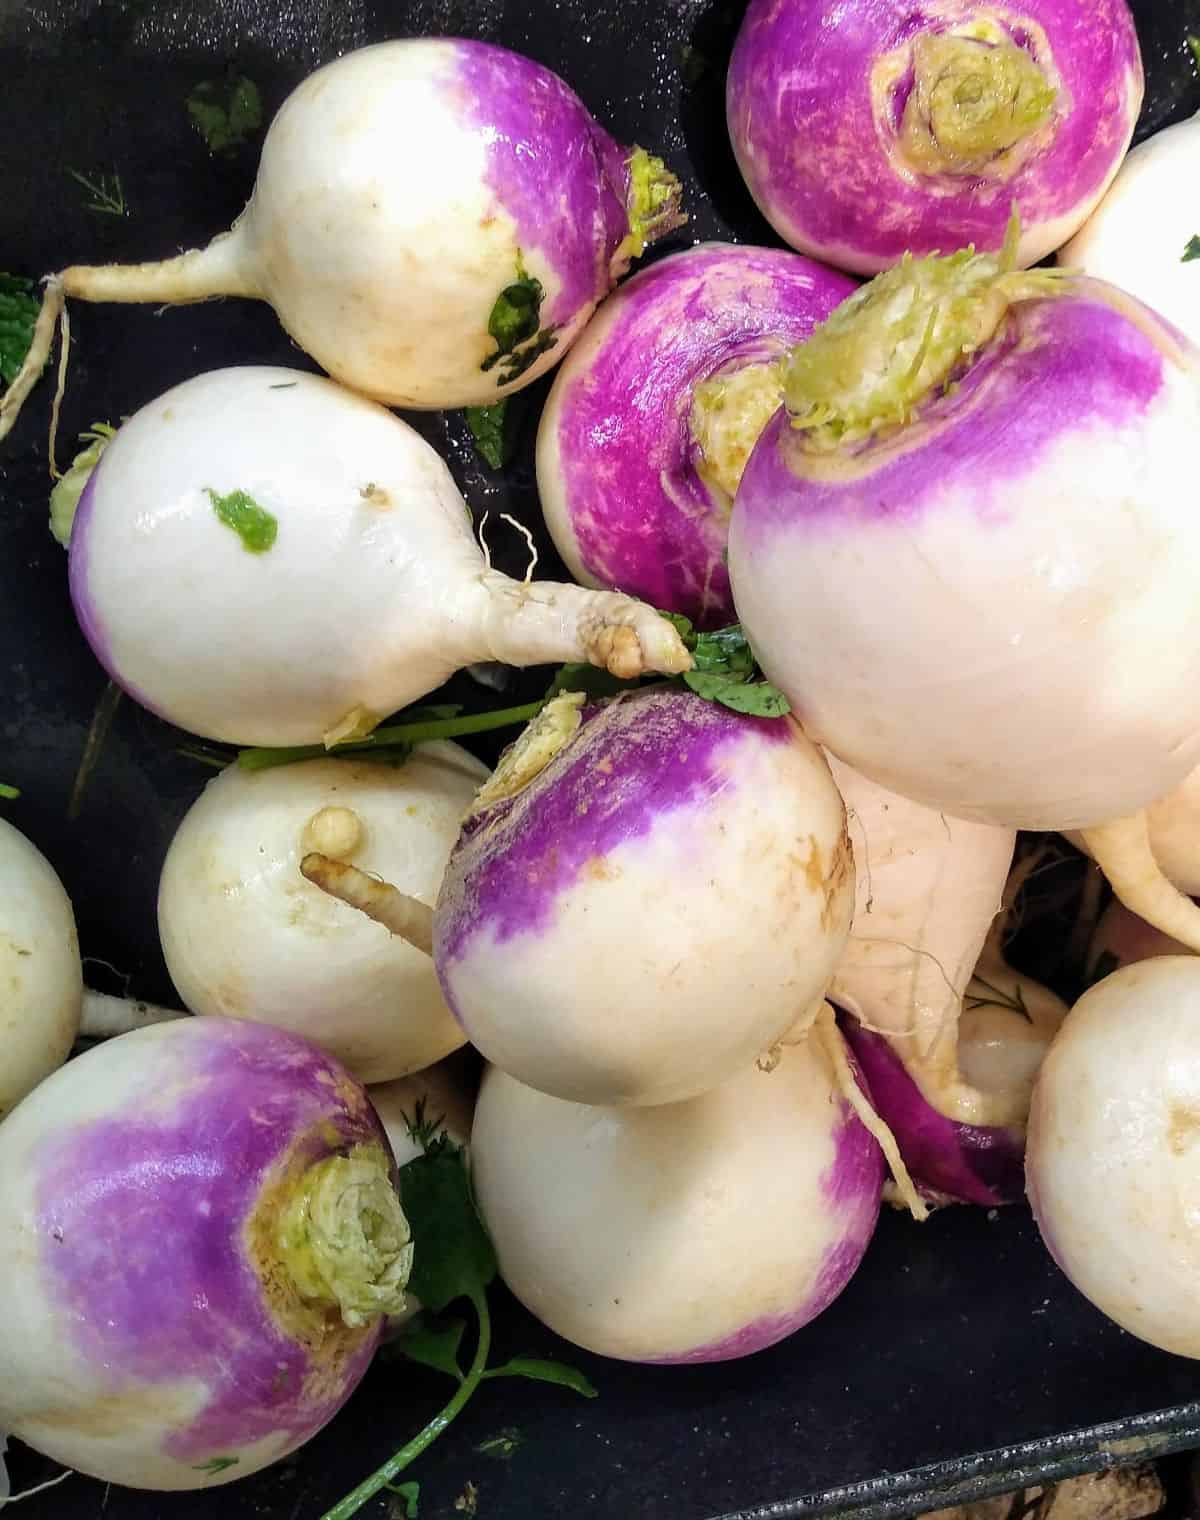 Turnips with purple on top are shown on top of a black background.